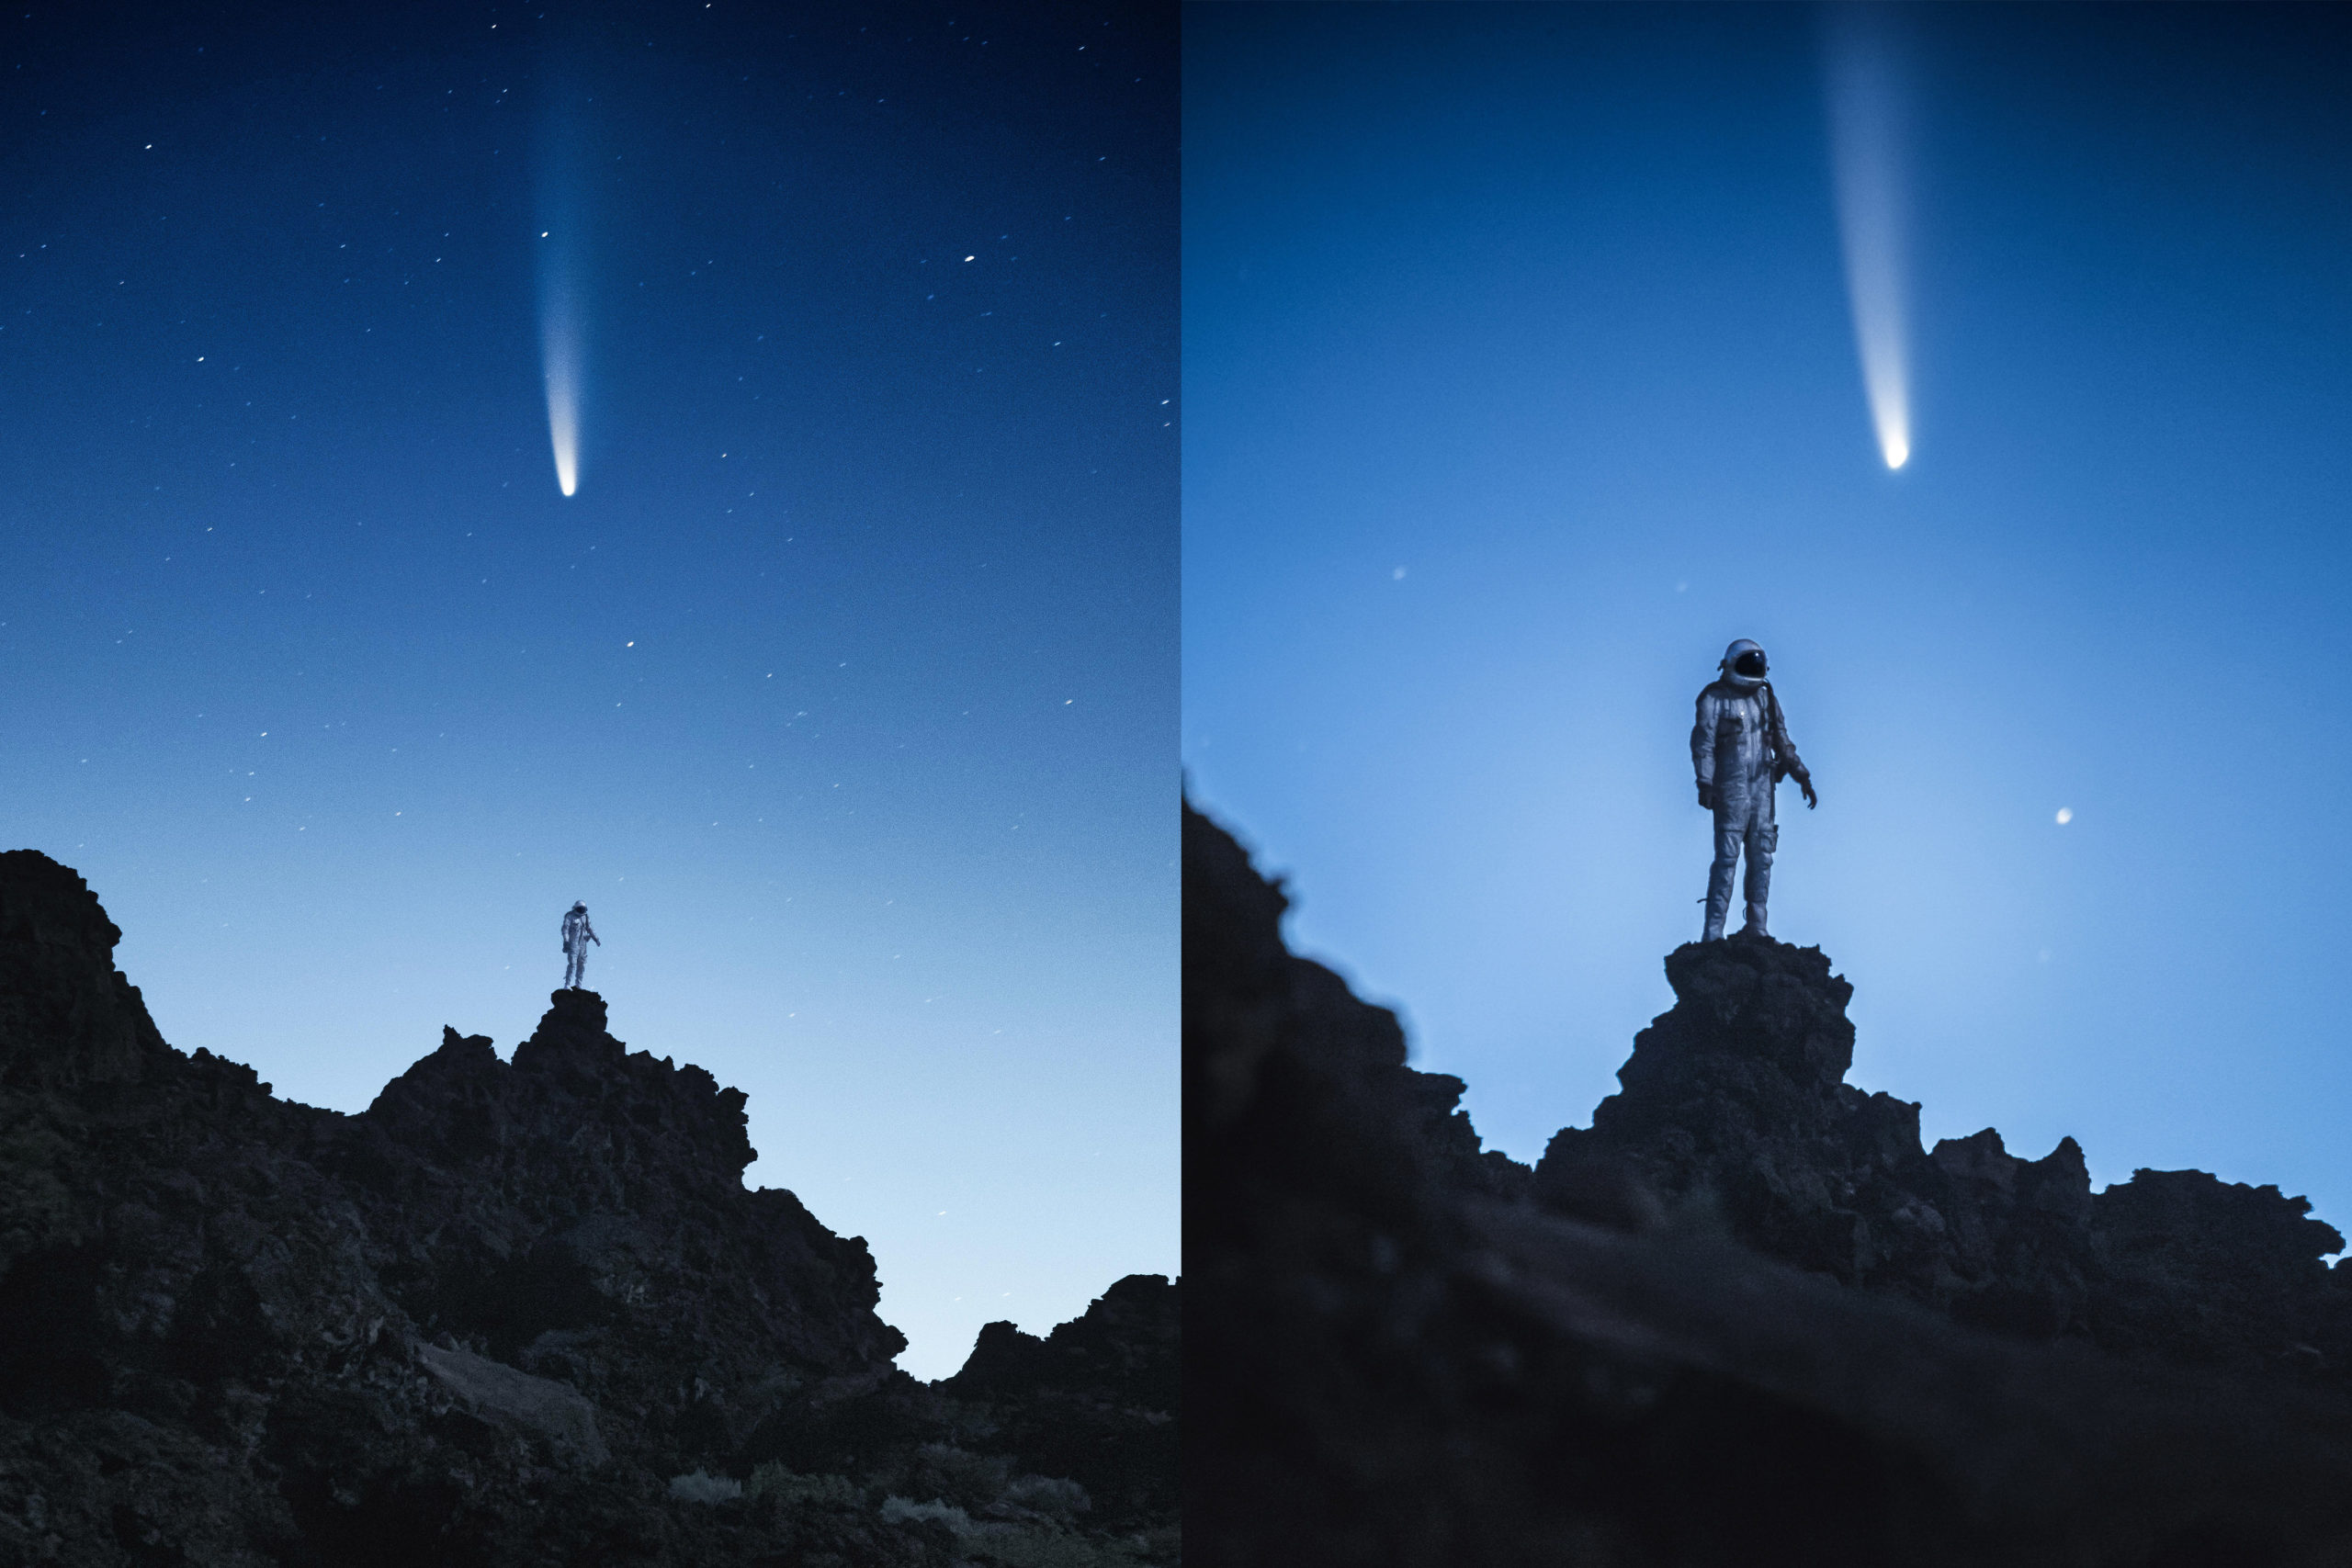 Astronaut & Comet Neowise Photography - Andrew Studer